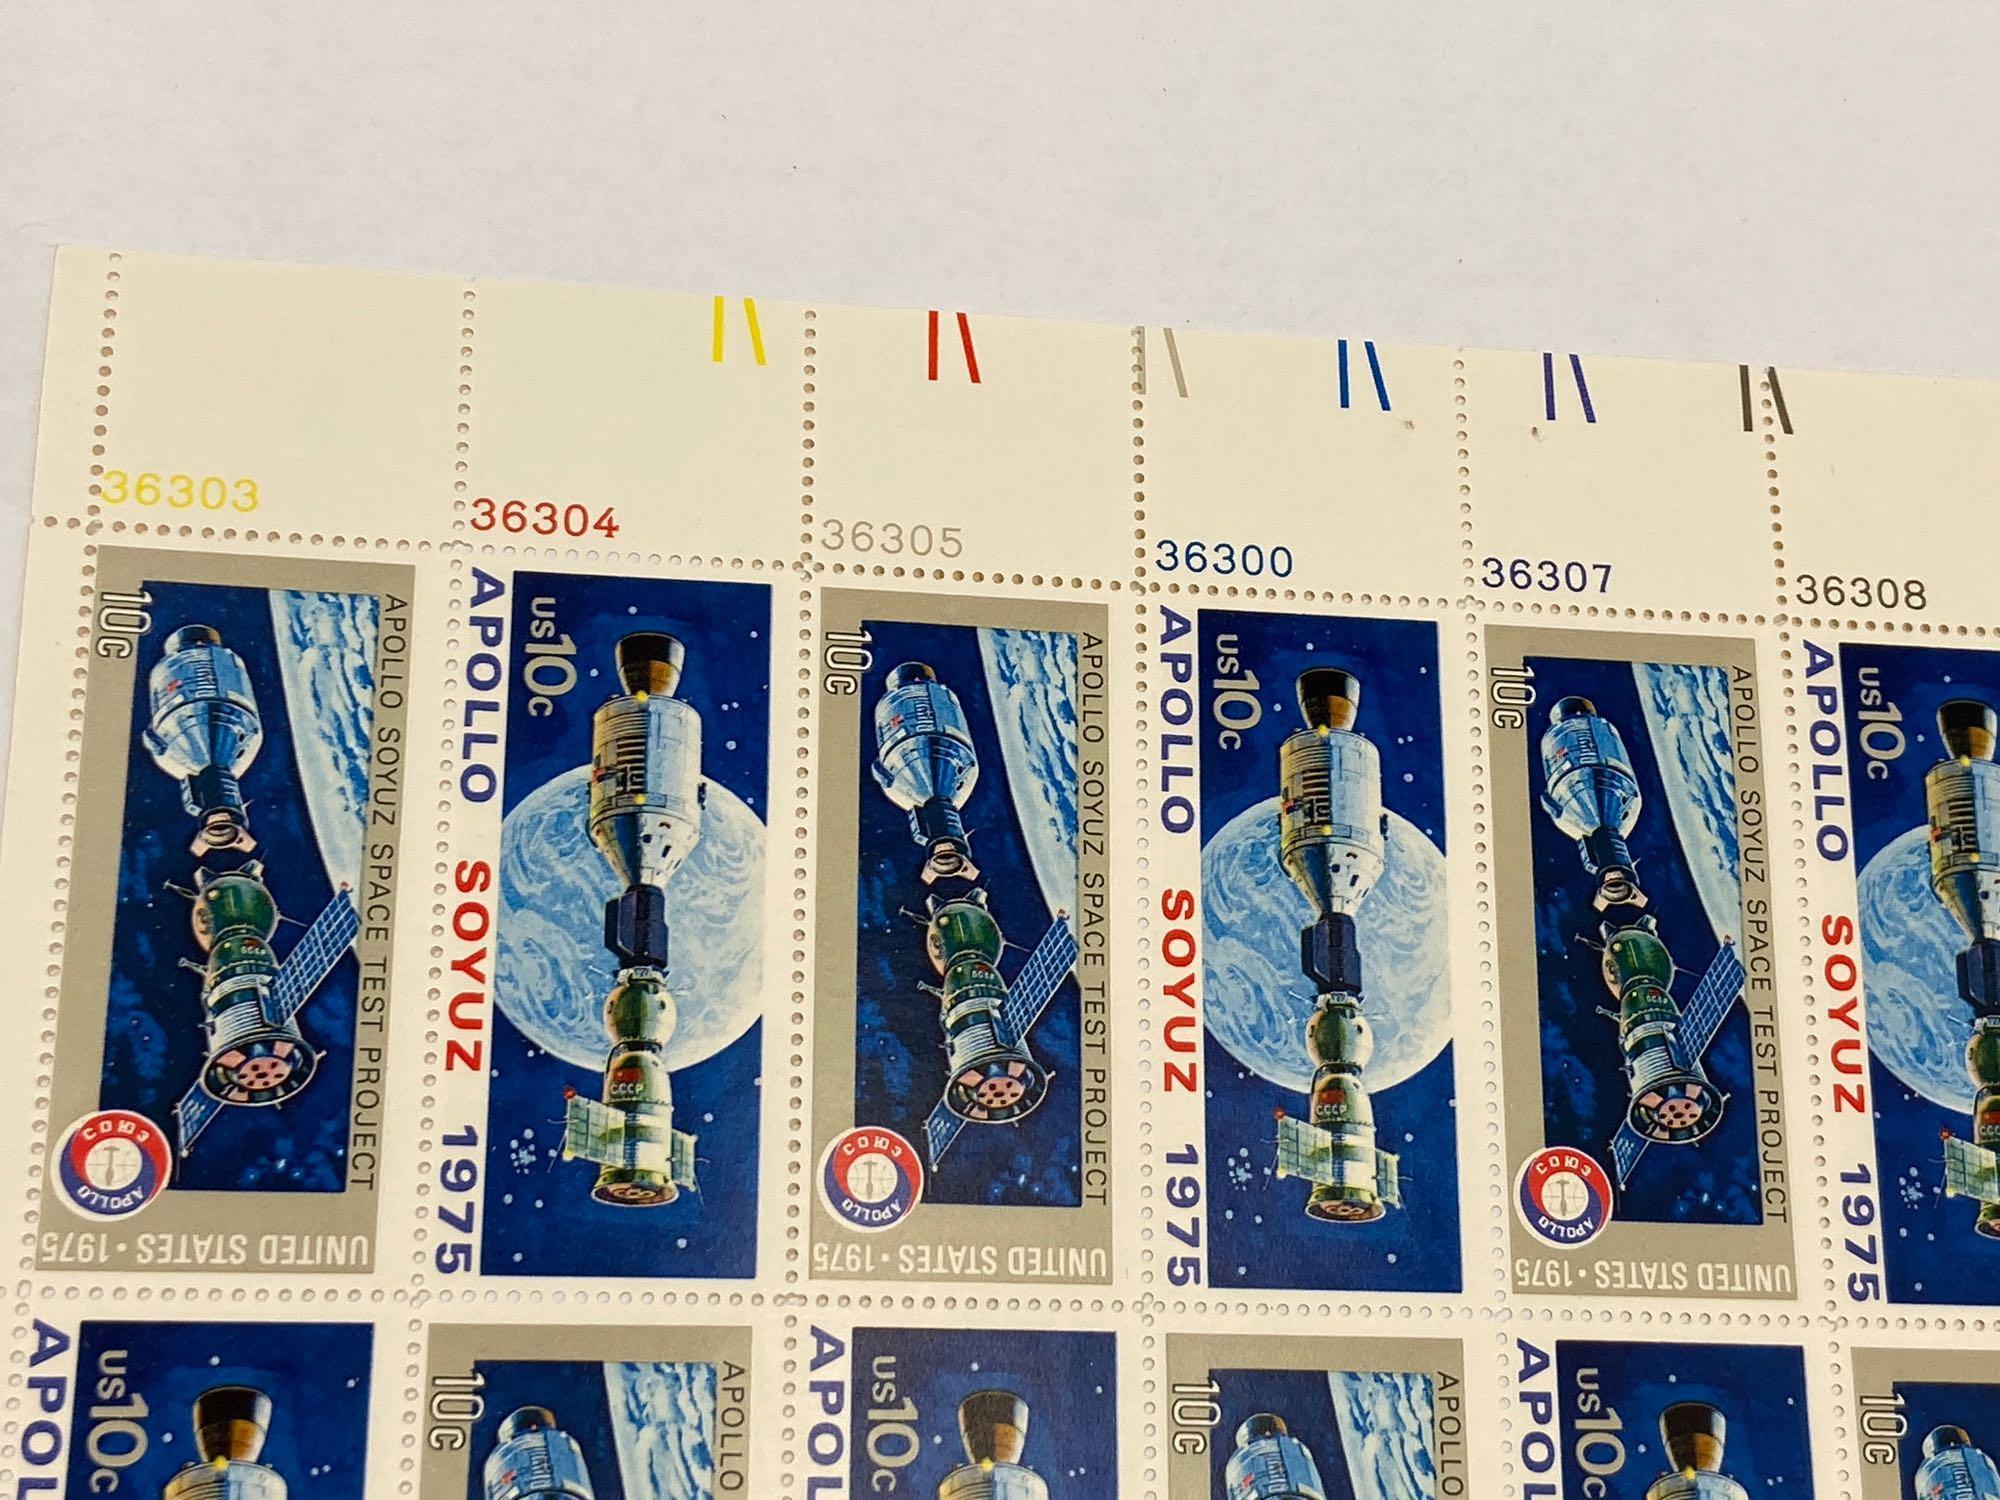 1975 U.S. 10 Cent Apollo Soyuz Stamp Sheets, Lot of 25